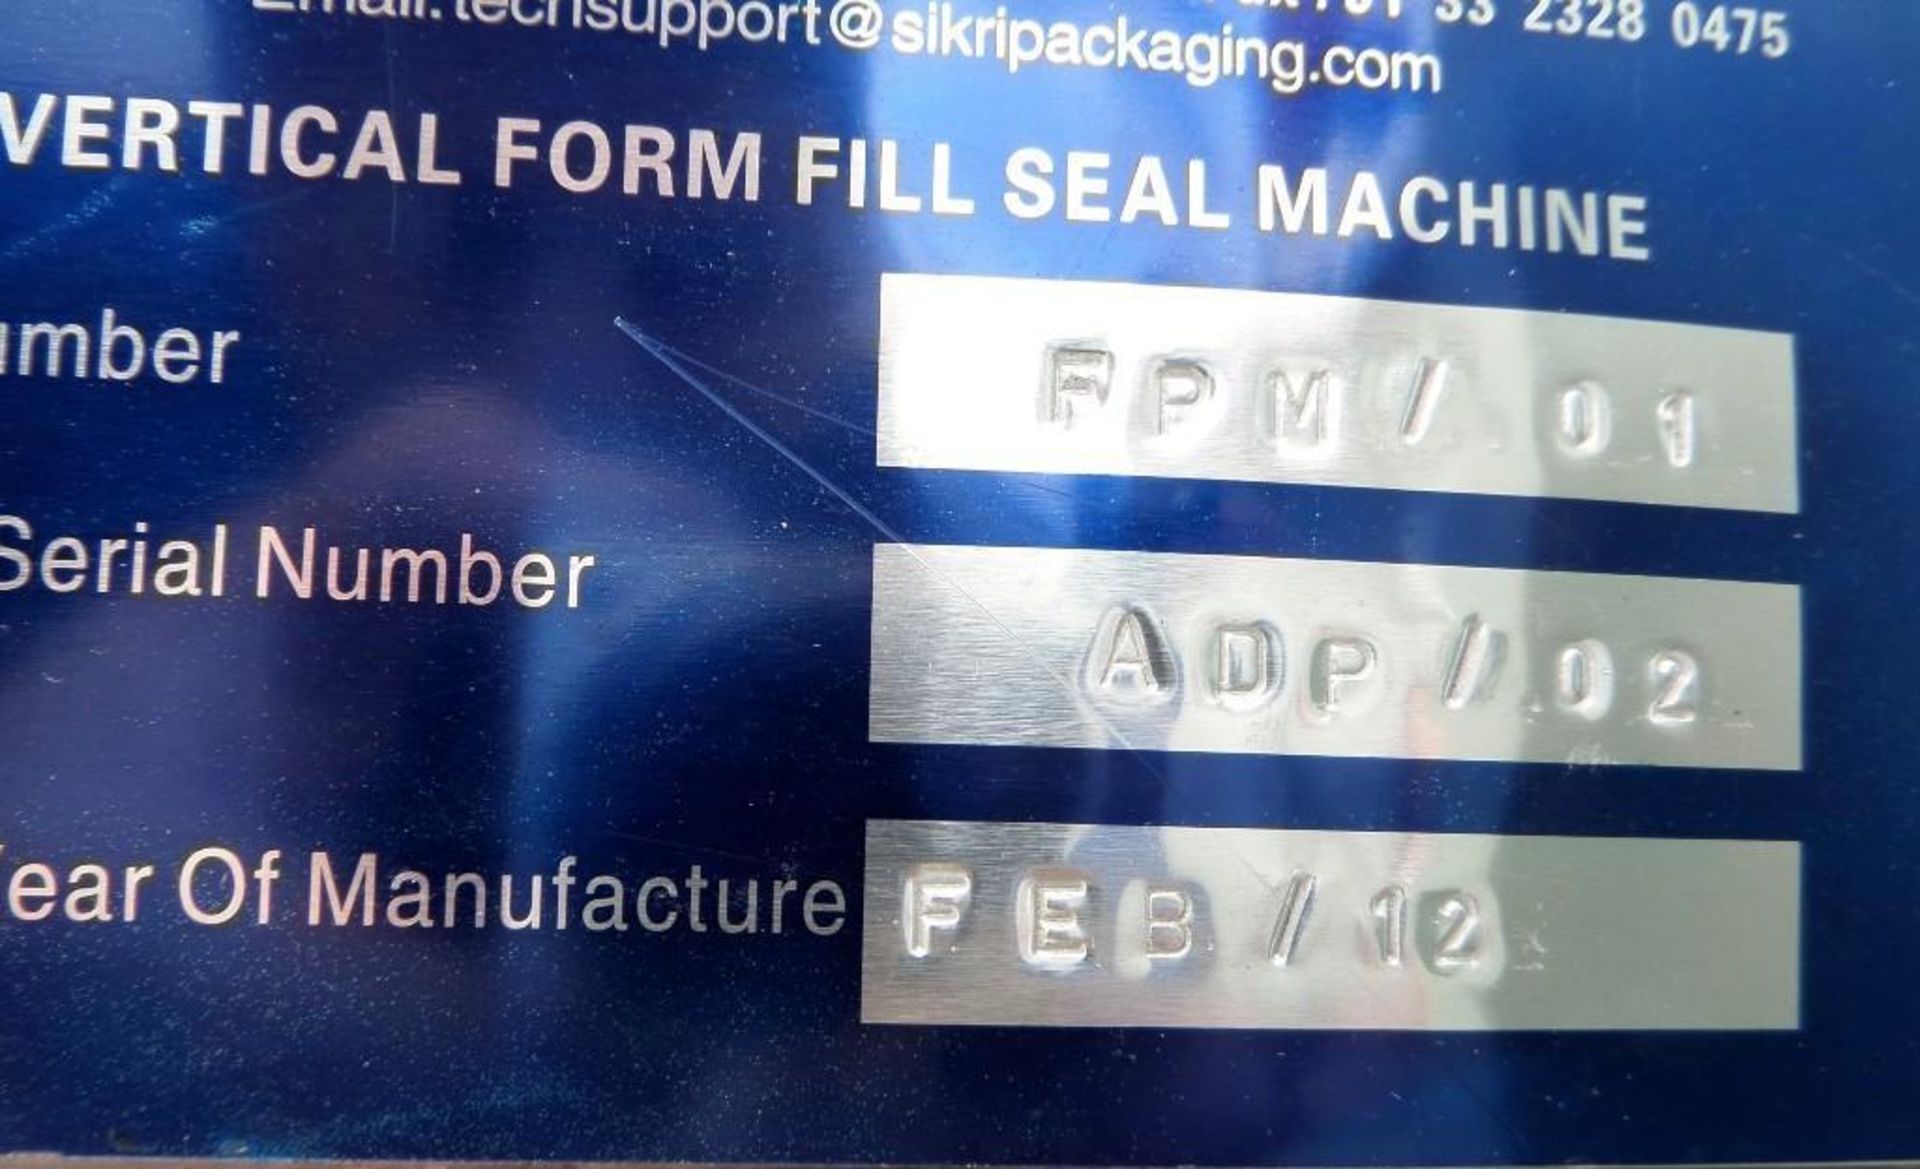 Vertical Form Fill Seal Machine Printer - Image 4 of 7